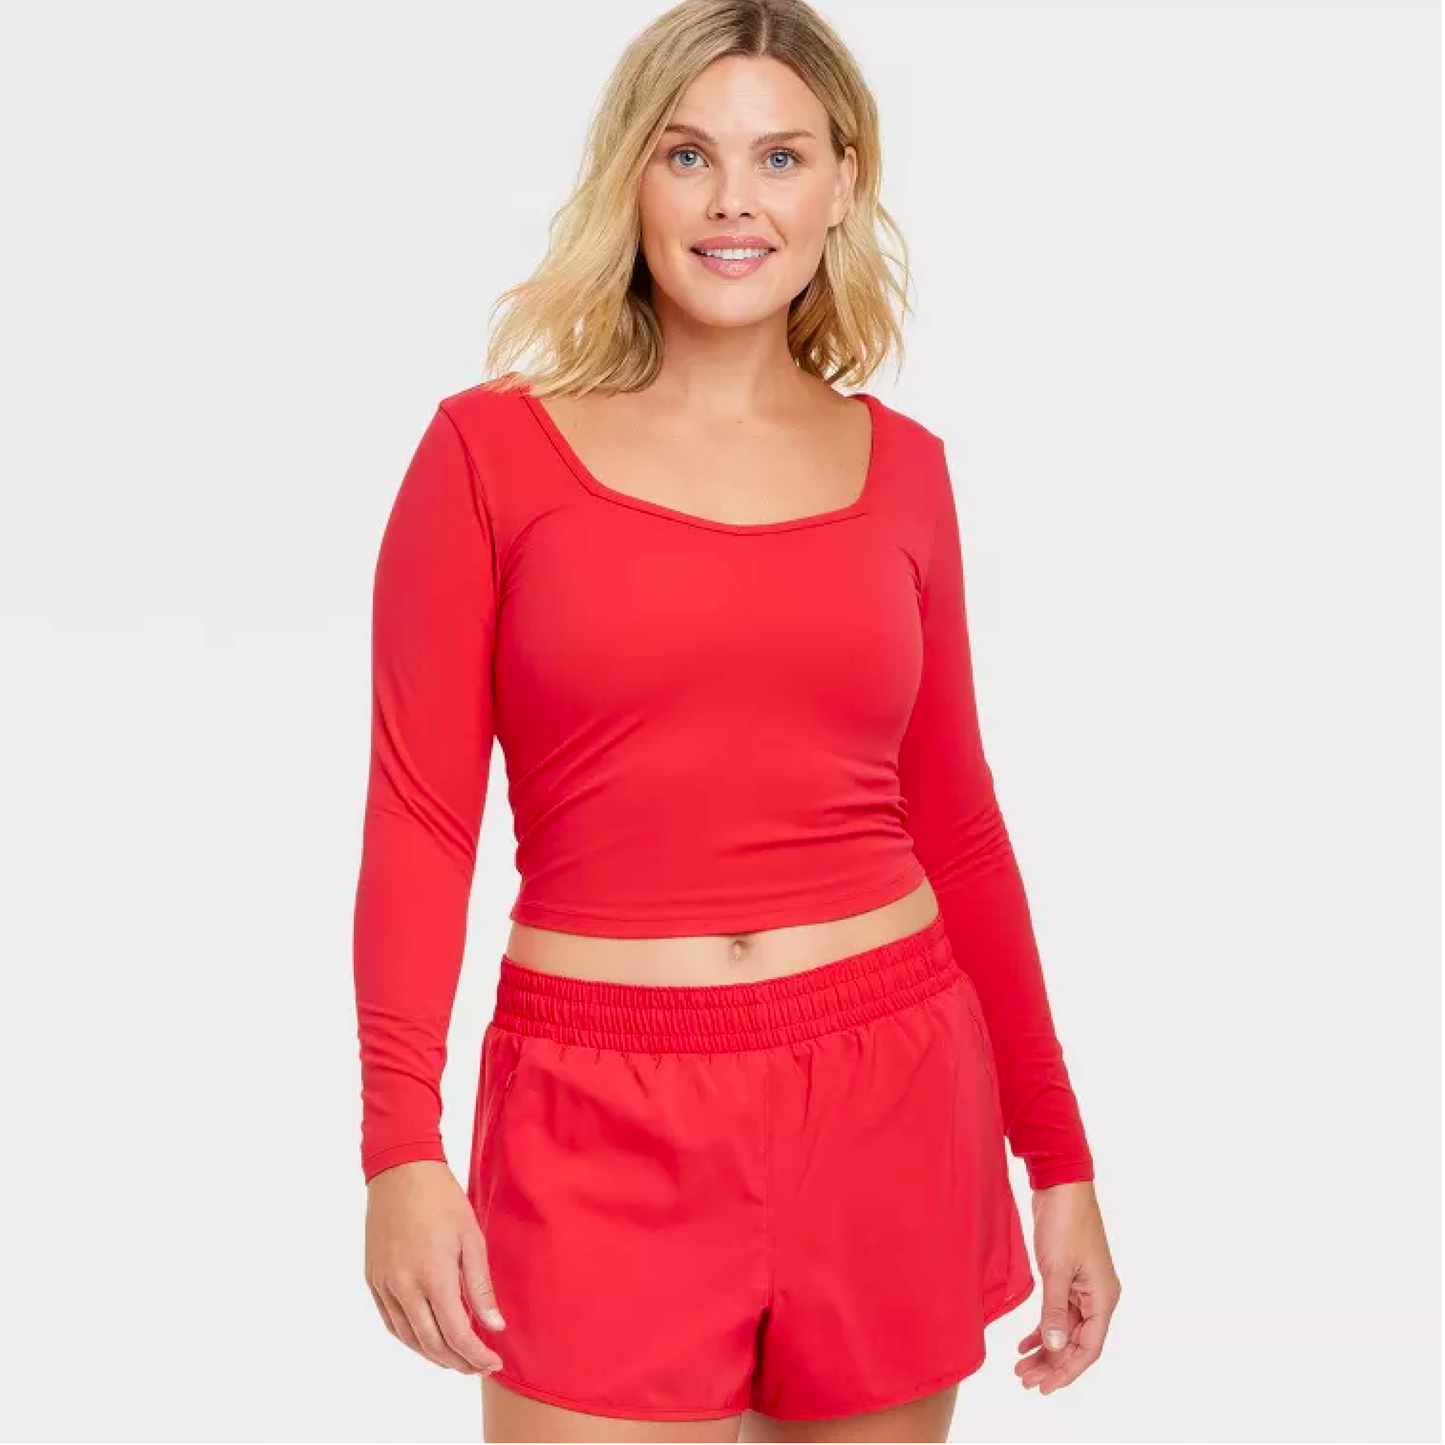 TARGET: Women's Everyday Soft Long Sleeve Top - All in Motion™